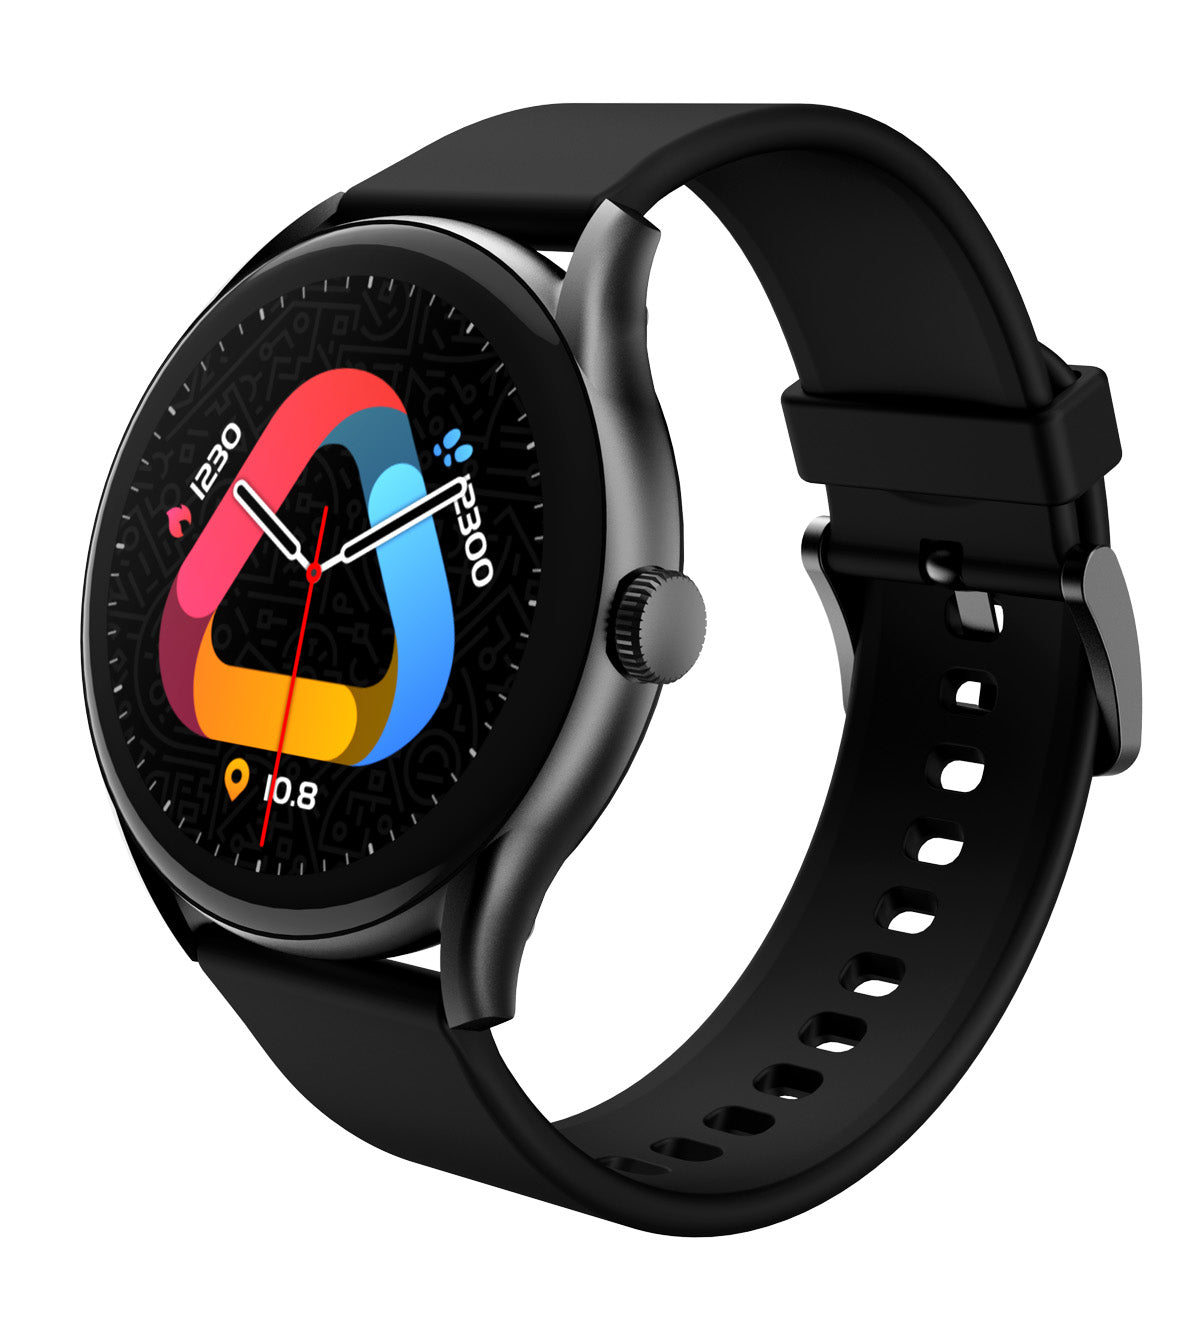 QCY Watch GT Smart Watch With Retina AMOLED HD Display, Brightness Sunlight Display, Health Monitoring, 10 Days Battery and 100 + Sports Modes - Black